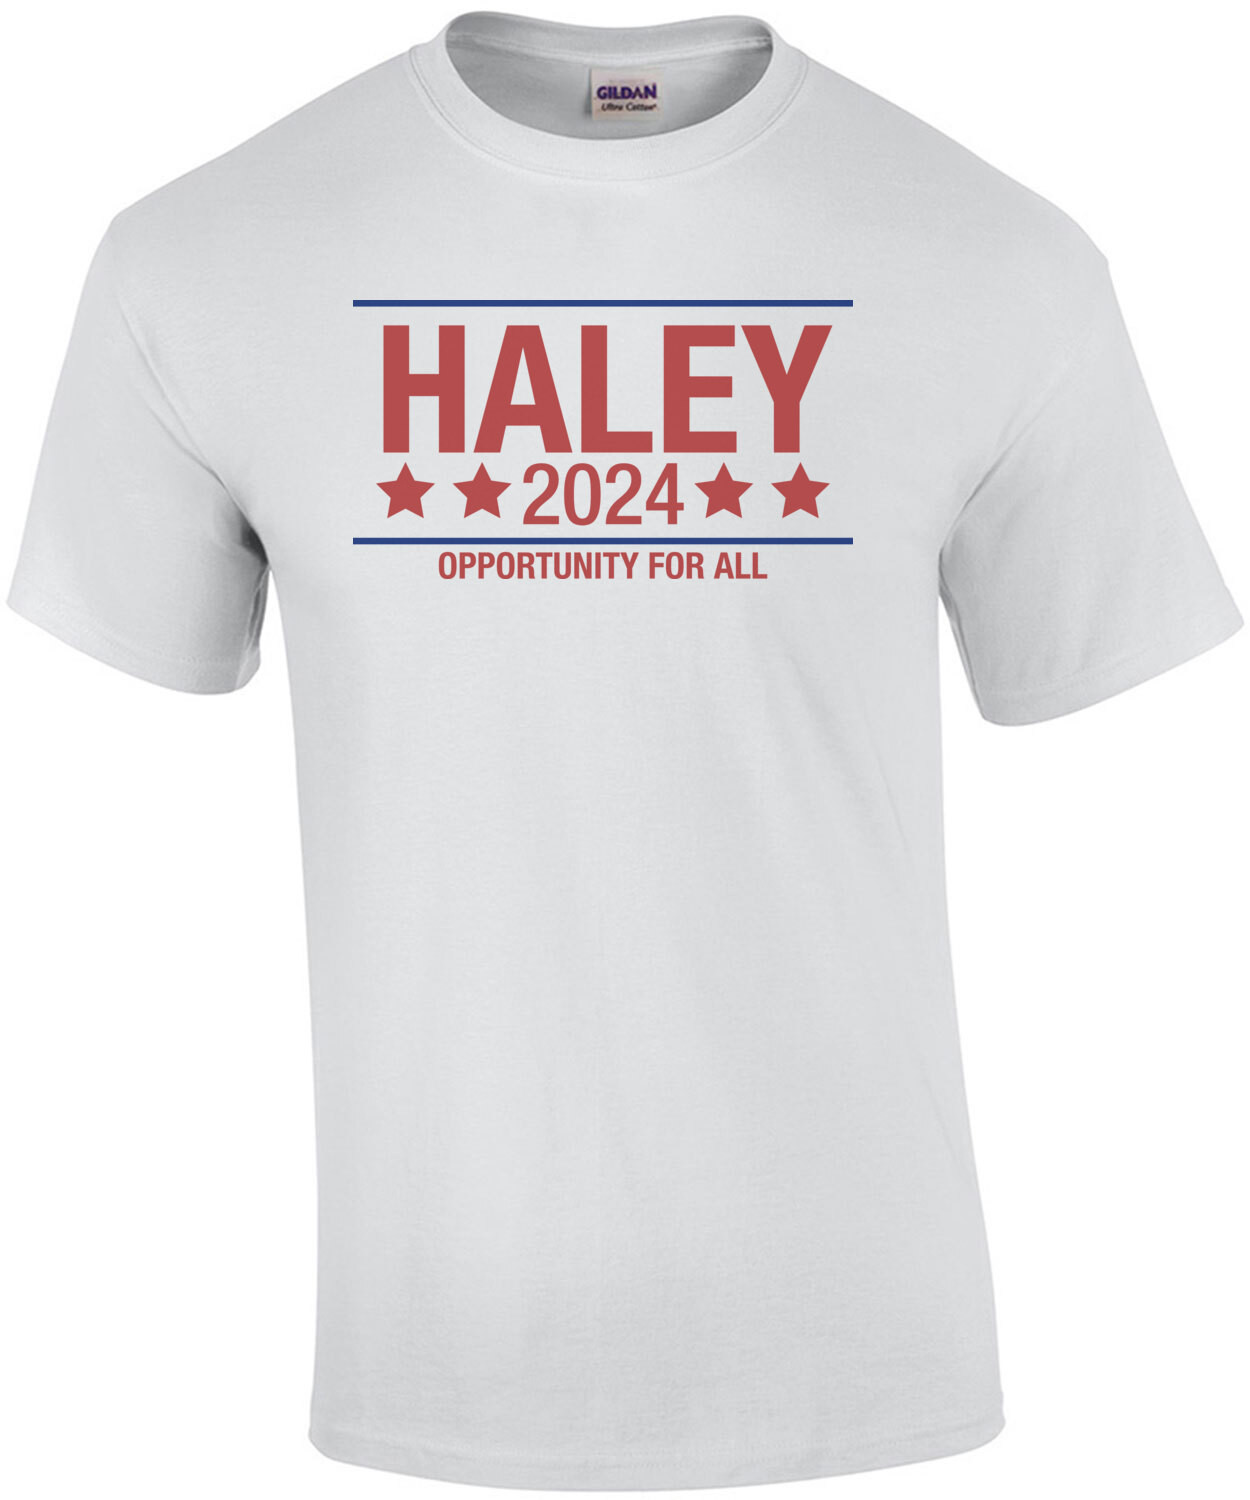 Haley 2024 Opportunity For All Shirt